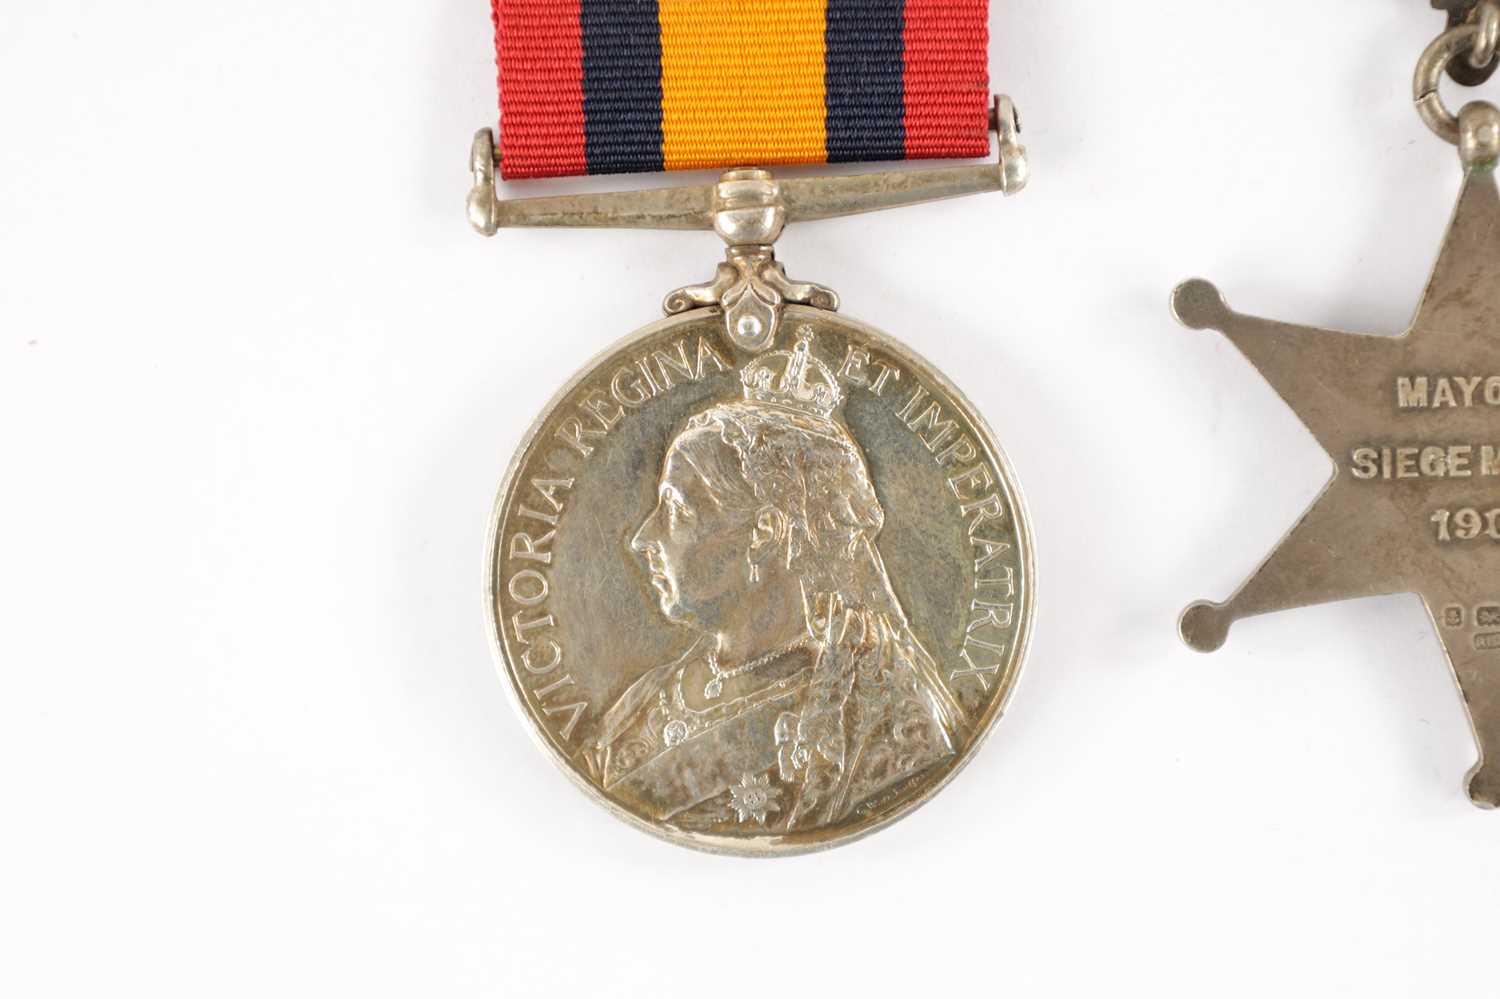 A SILVER KIMBERLEY STAR MEDAL AND A QUEENS SOUTH AFRICAN MEDAL - Image 7 of 9